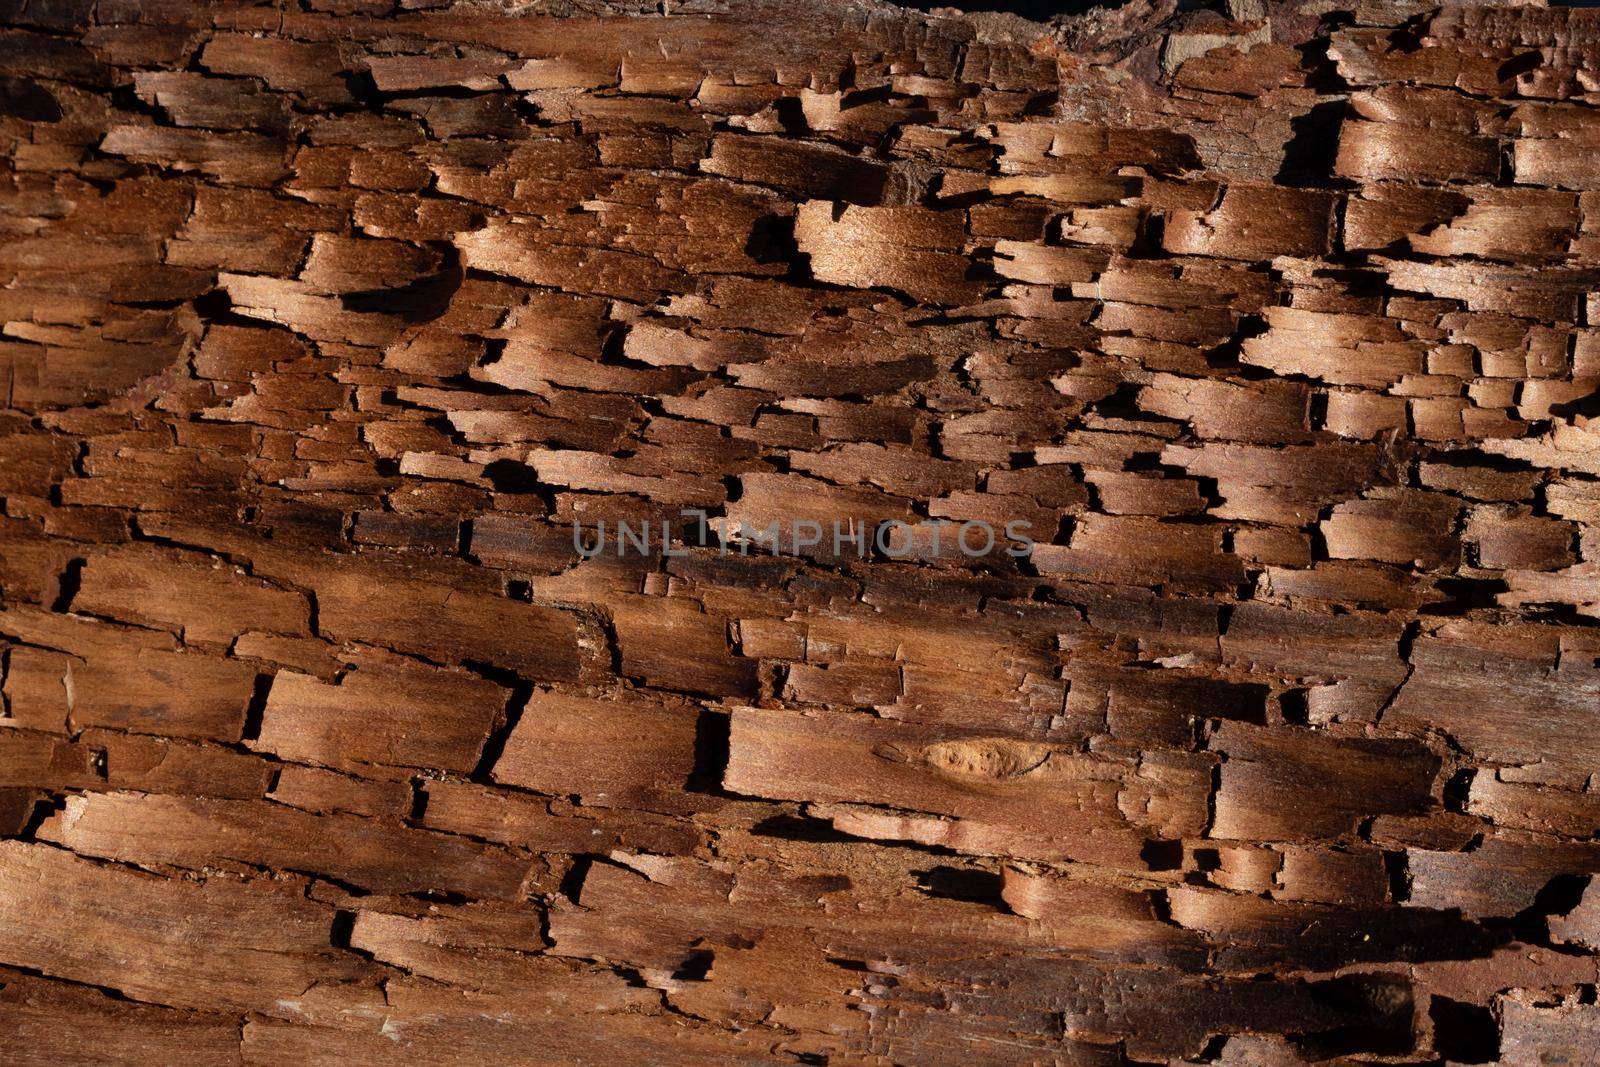 The bark pattern is a seamless wood texture. For background woodwork, brown hardwood bark by lapushka62